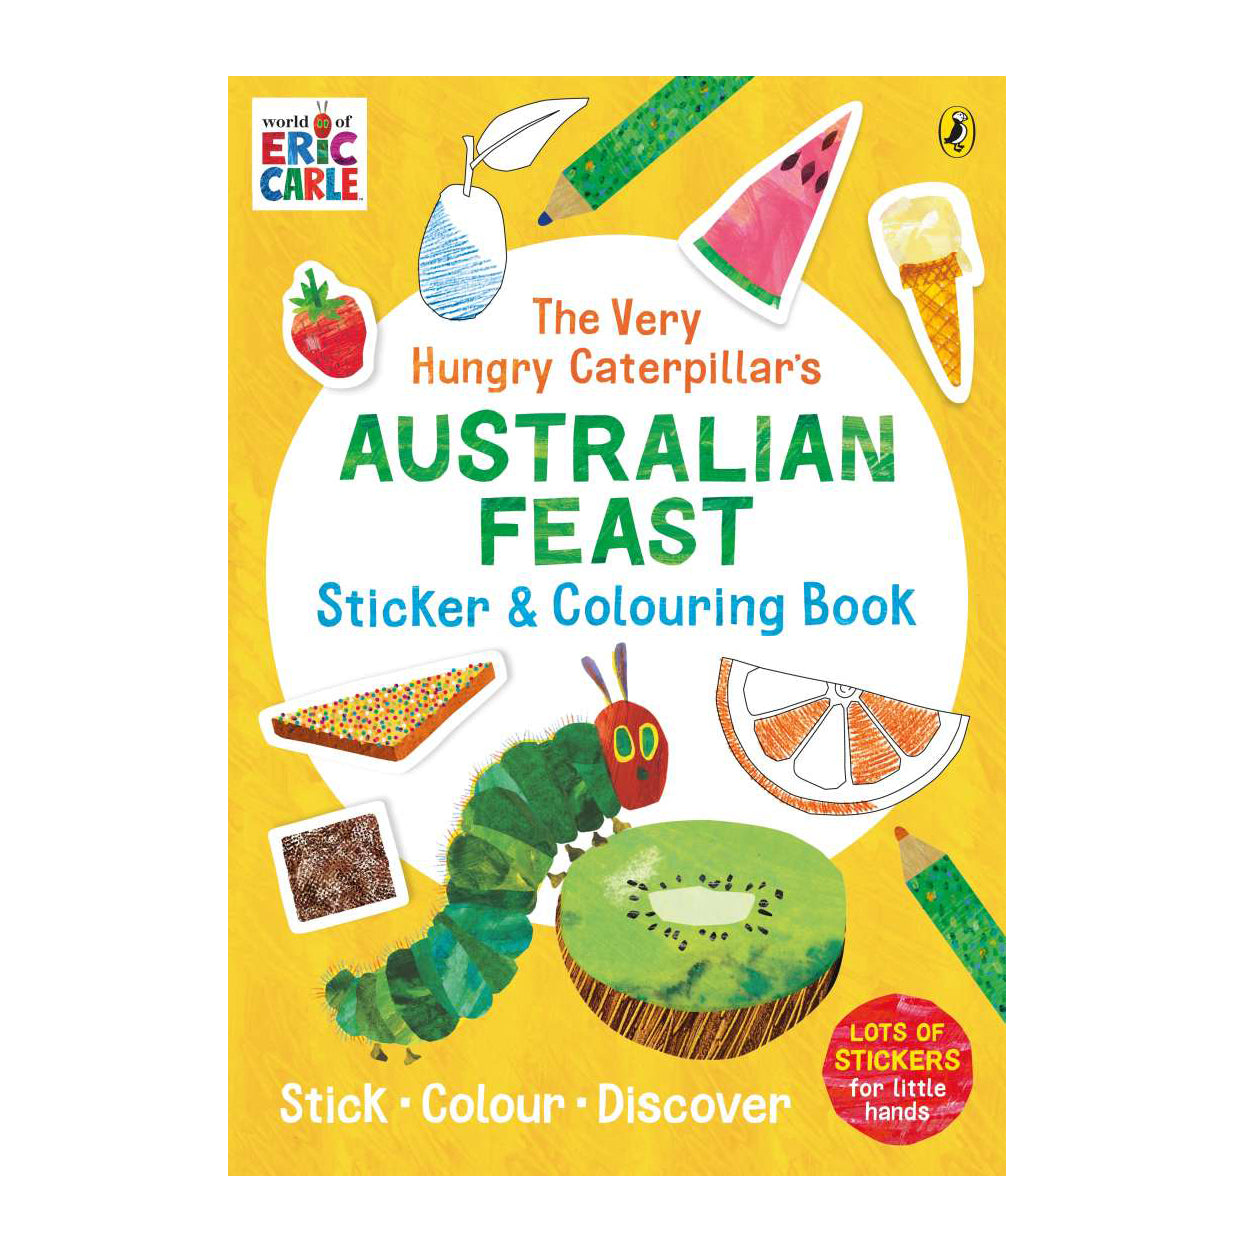 The Very Hungry Caterpillar AUSTRALIAN FEAST STICKER AND COLOURING BOOK